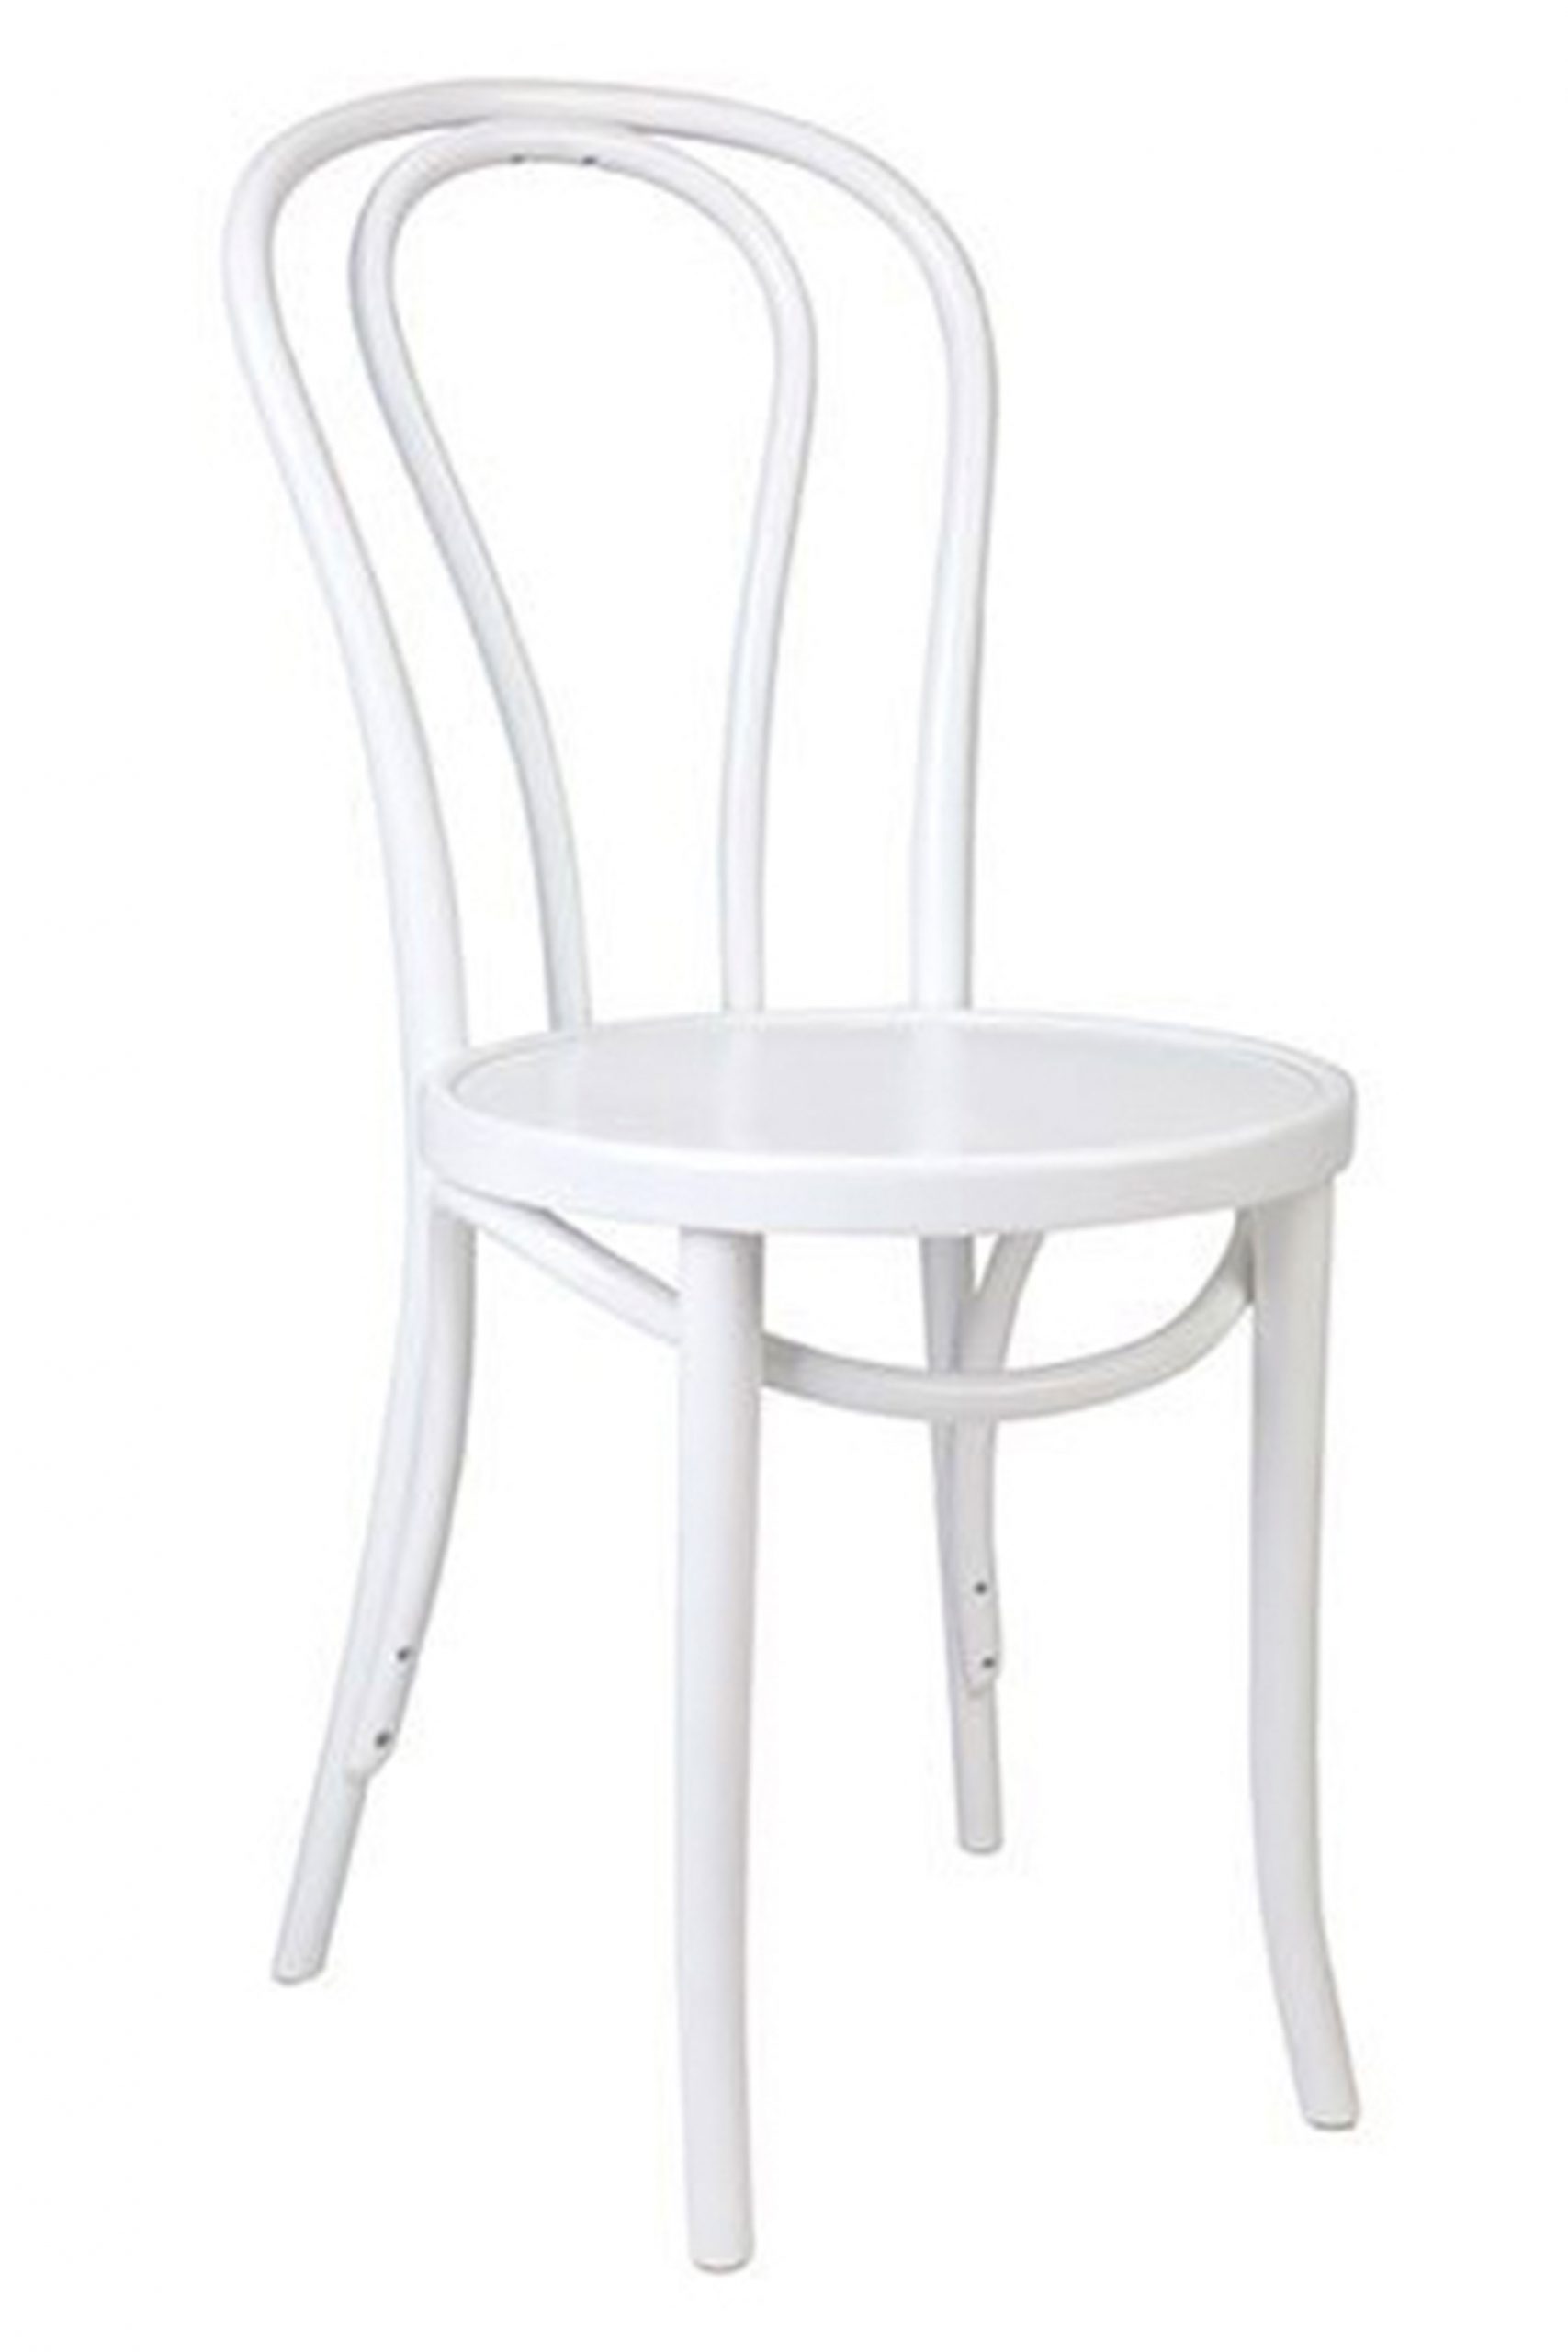 No 18 Bentwood Chair White